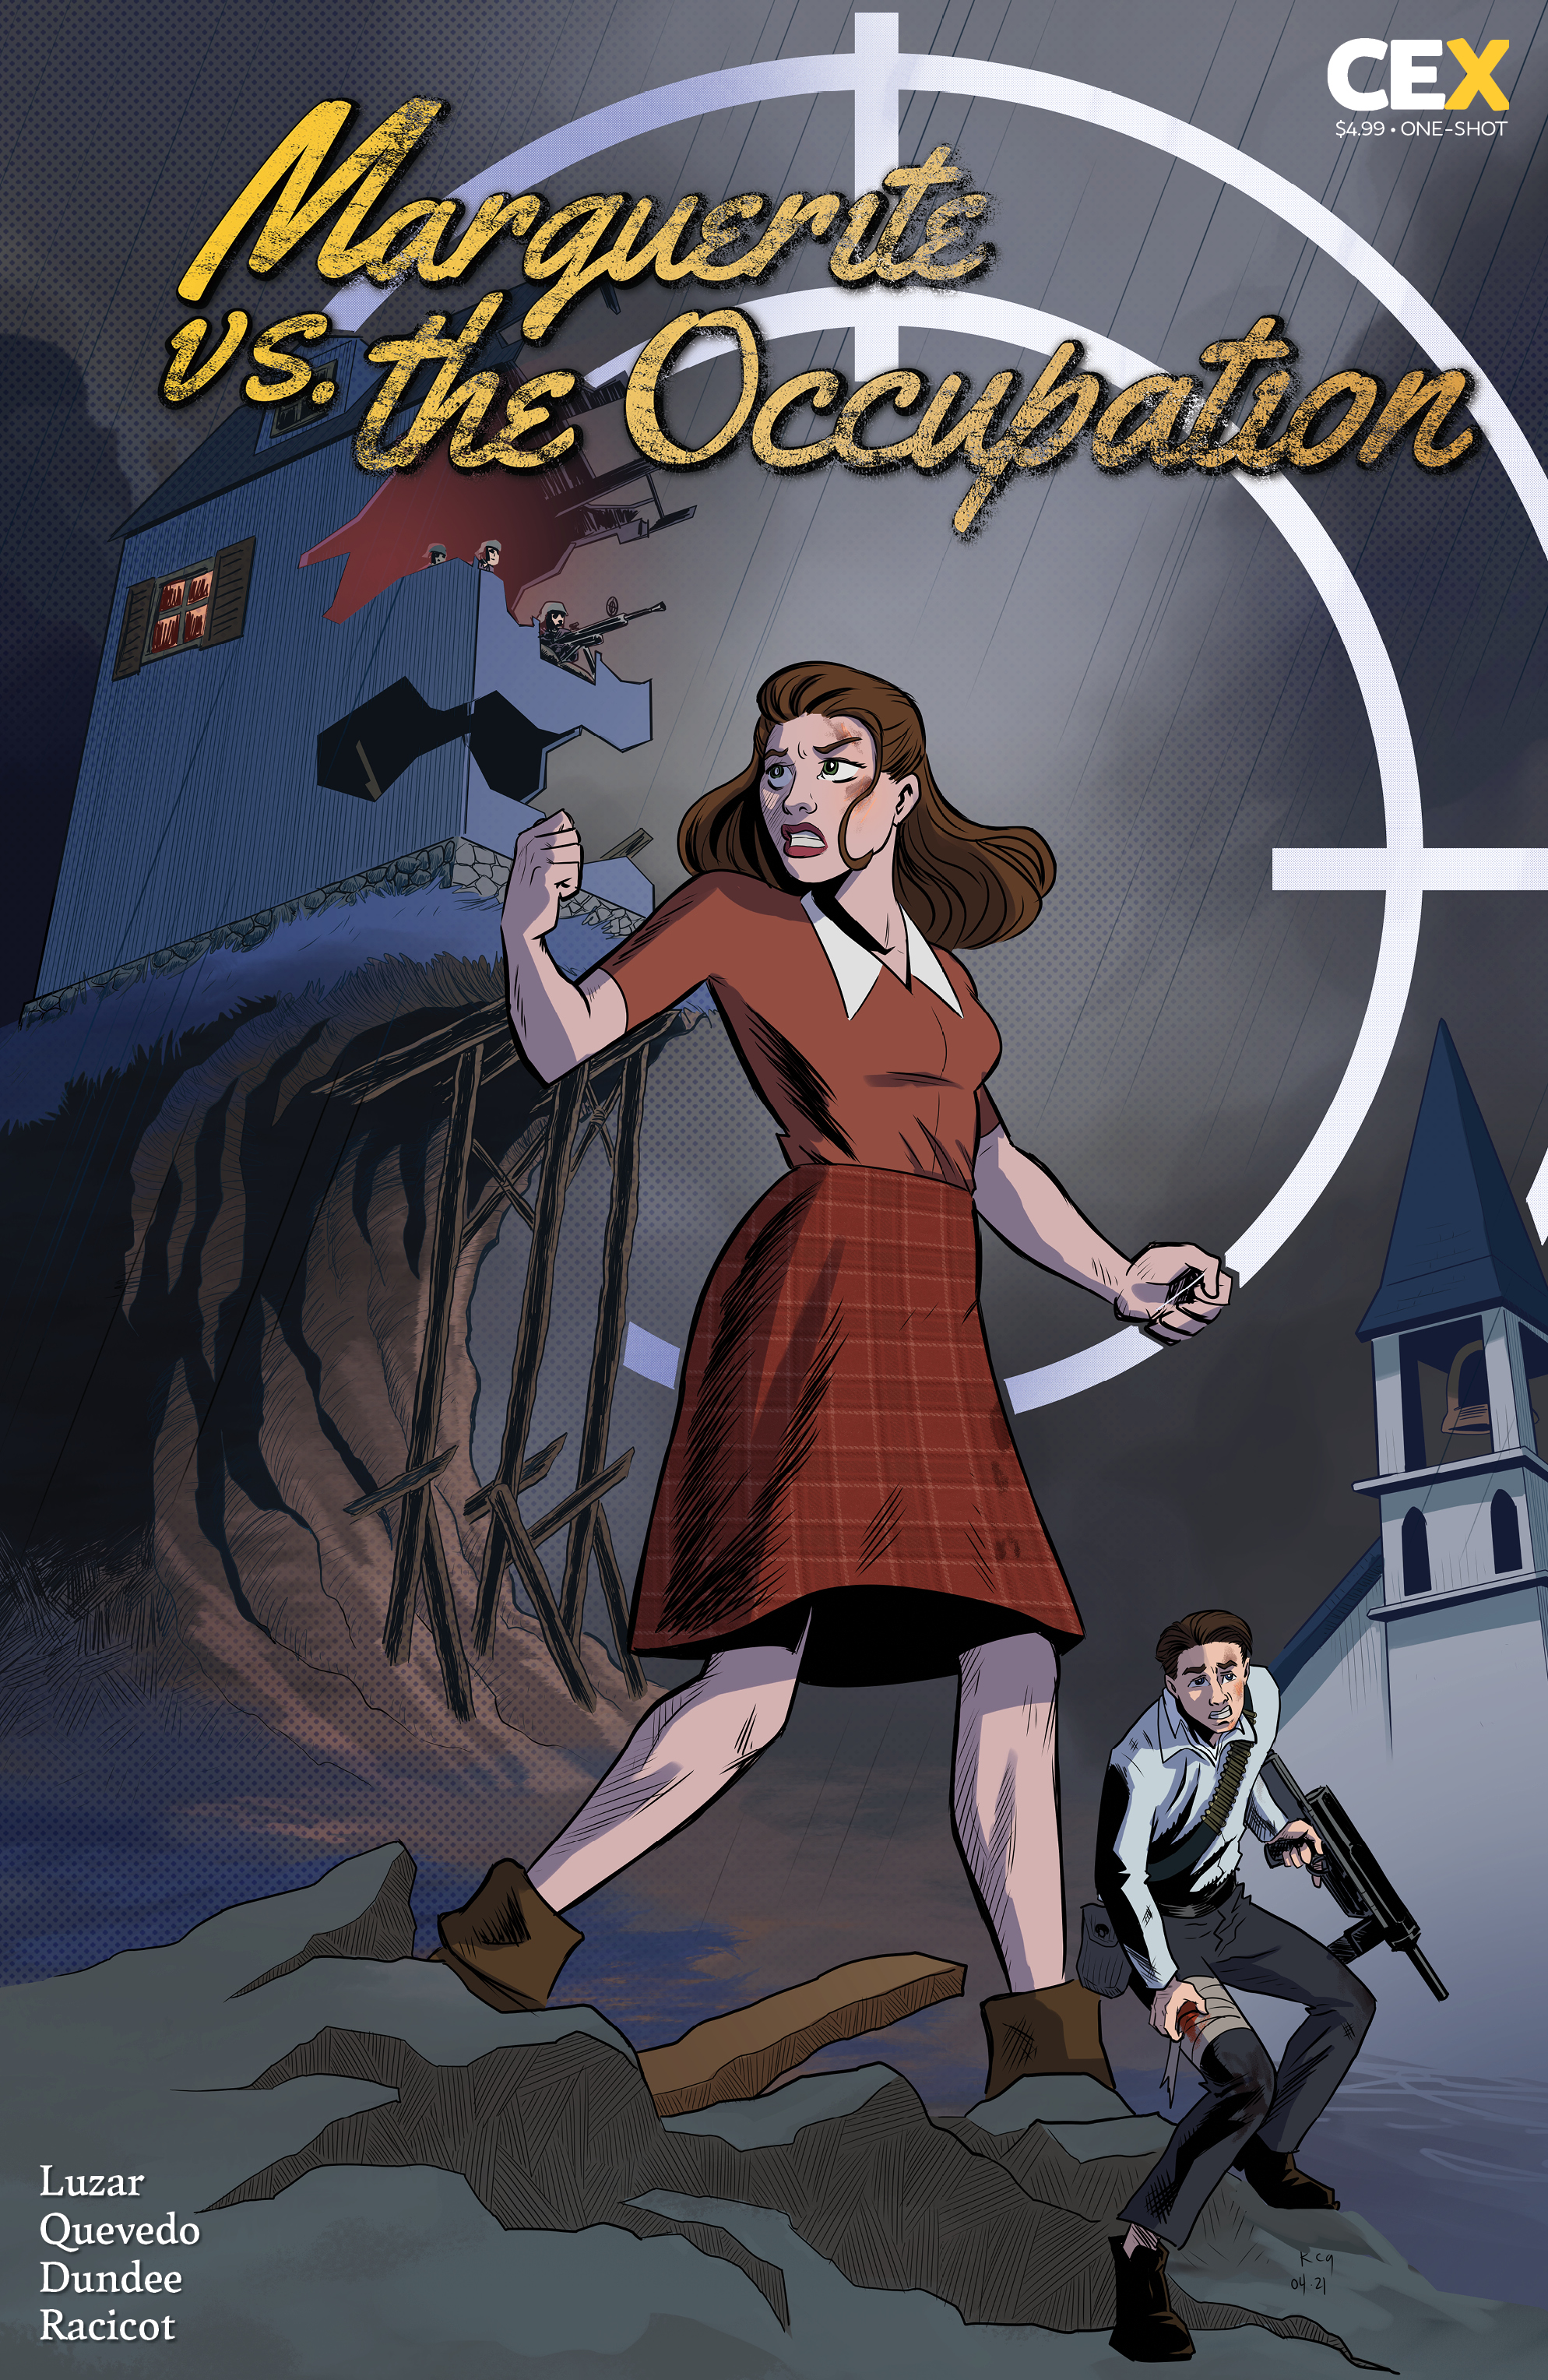 Marguerite Vs The Occupation #1 (One Shot) Cover A Kasey Quevedo